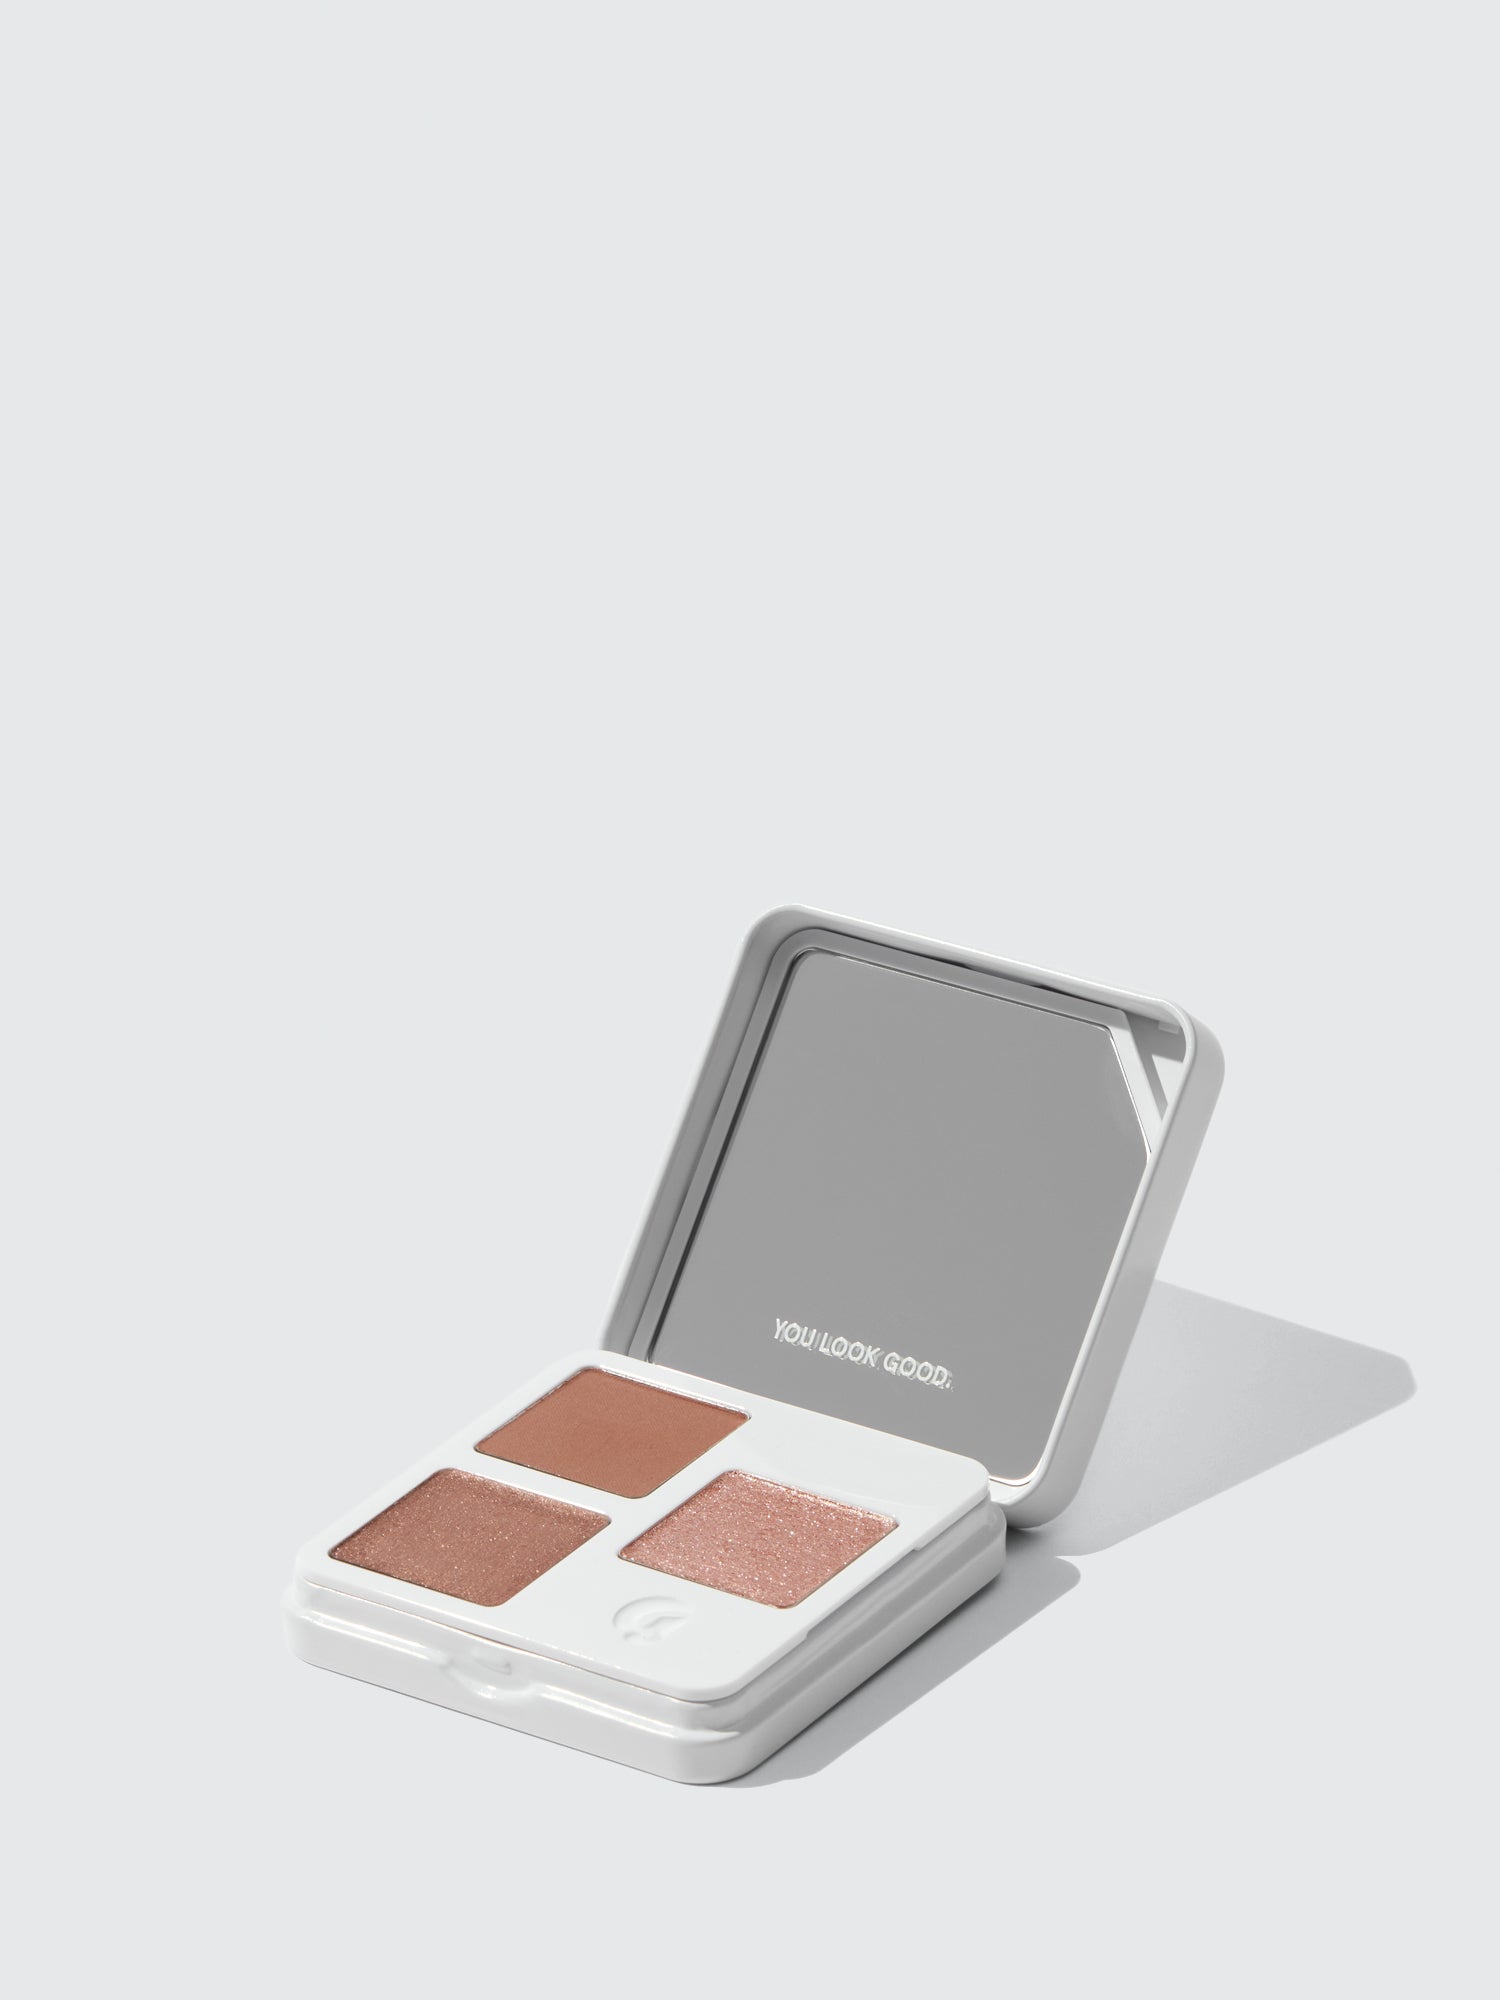 Glossier’s First-Ever Eyeshadow Palettes Are Effortless, Elevated — & Refillable